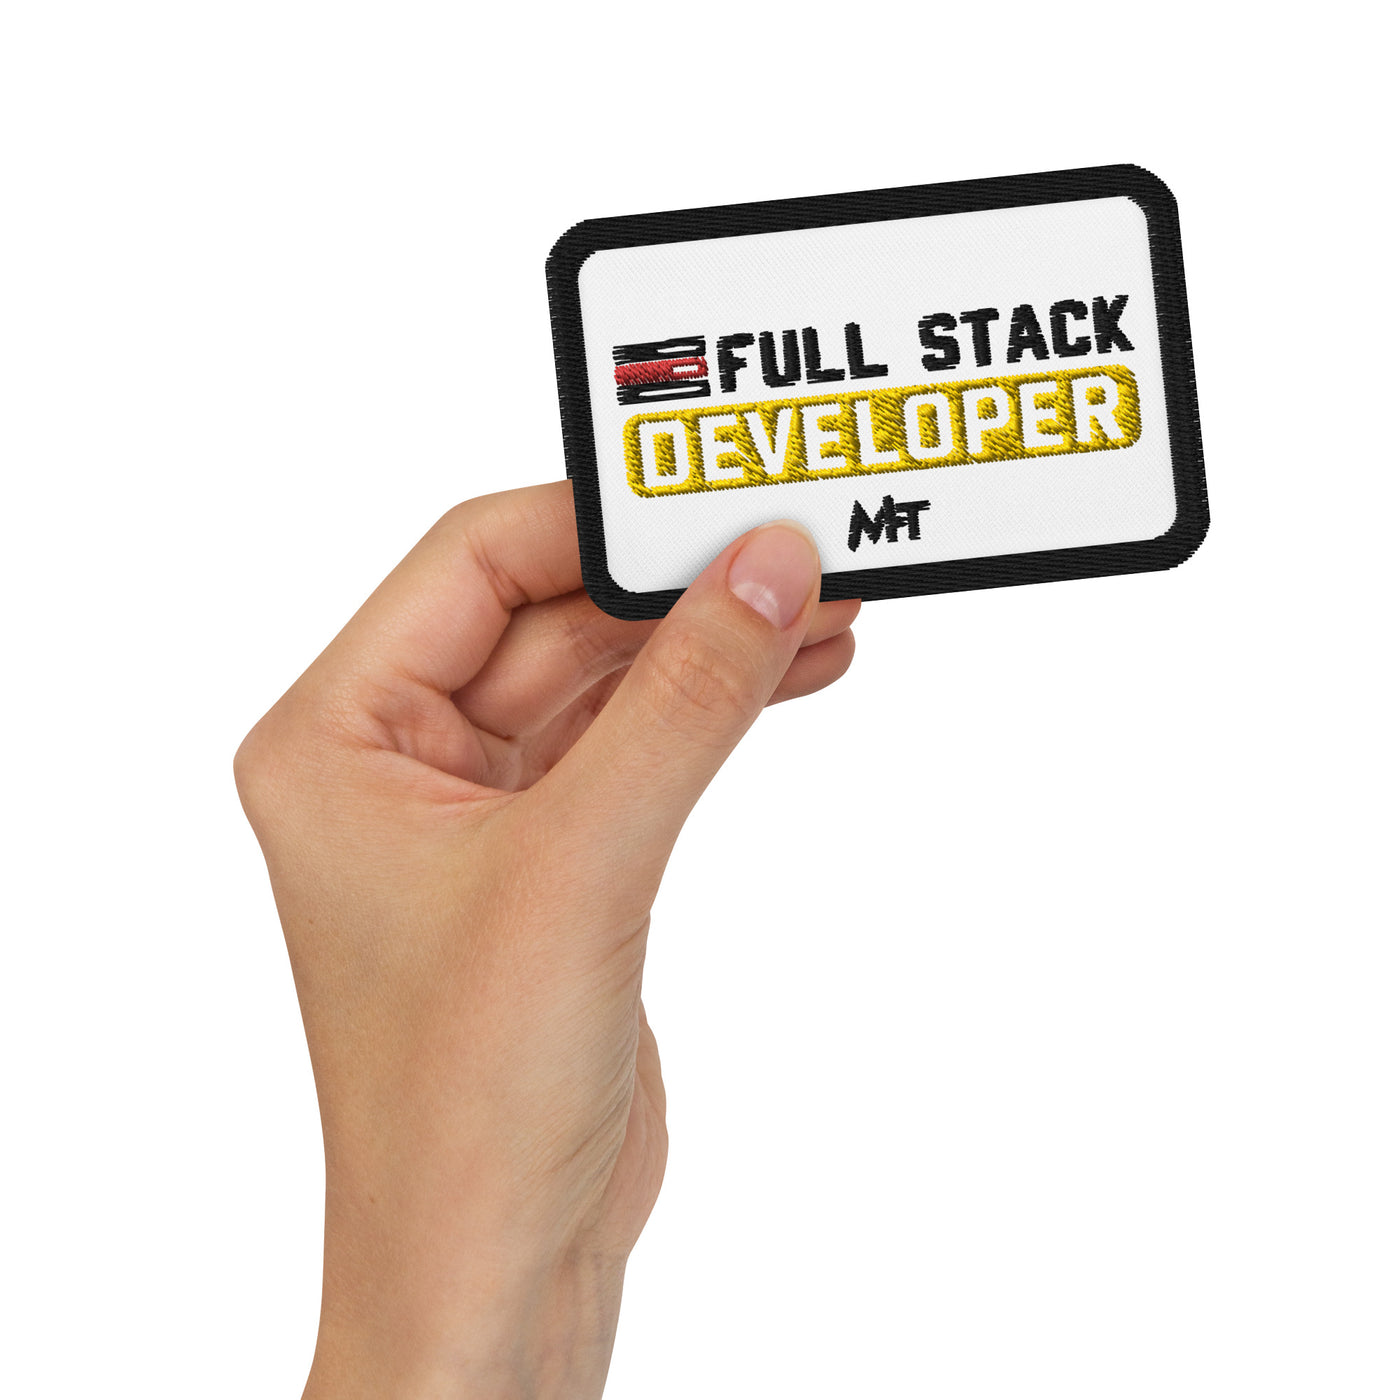 Full stack developer - Embroidered patches